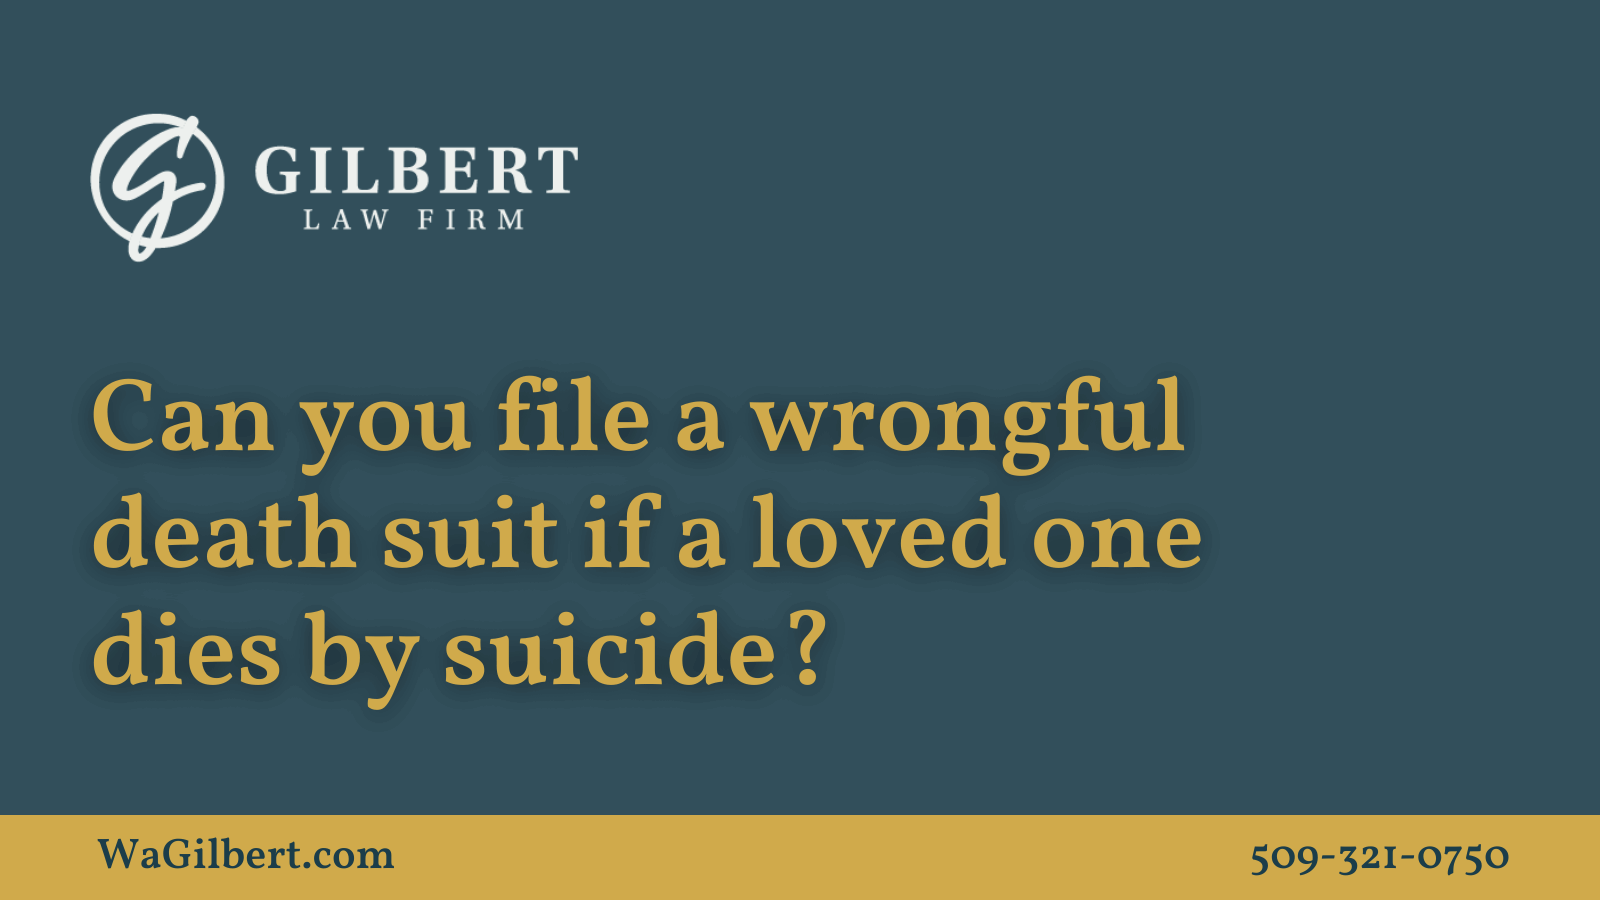 Can You File a Wrongful Death Suit If A Loved One Dies by Suicide? - Gilbert Law Firm Spokane Washington